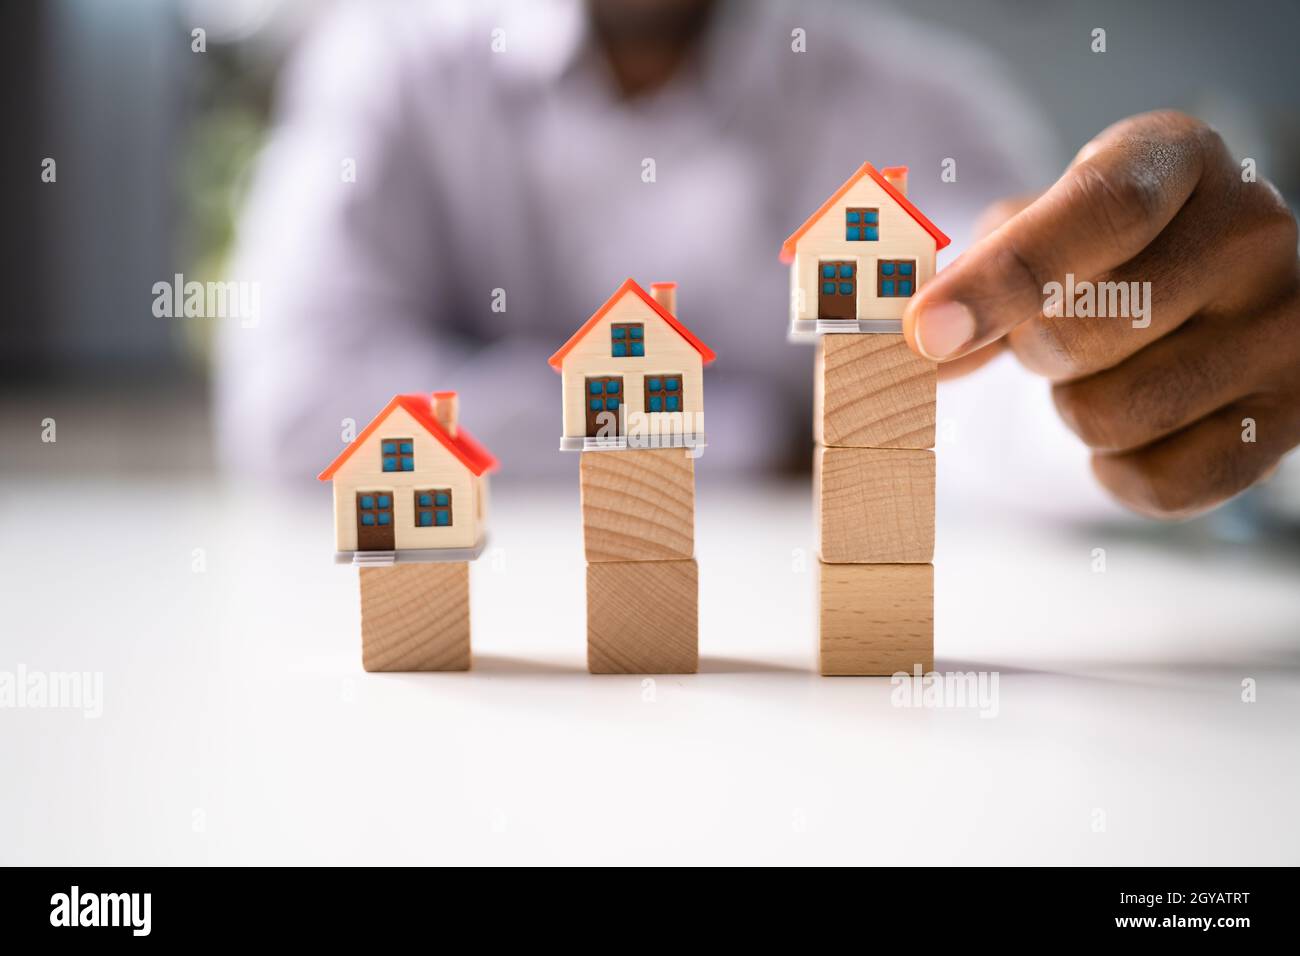 Real Estate House Sale Price Increase Or Rise Stock Photo